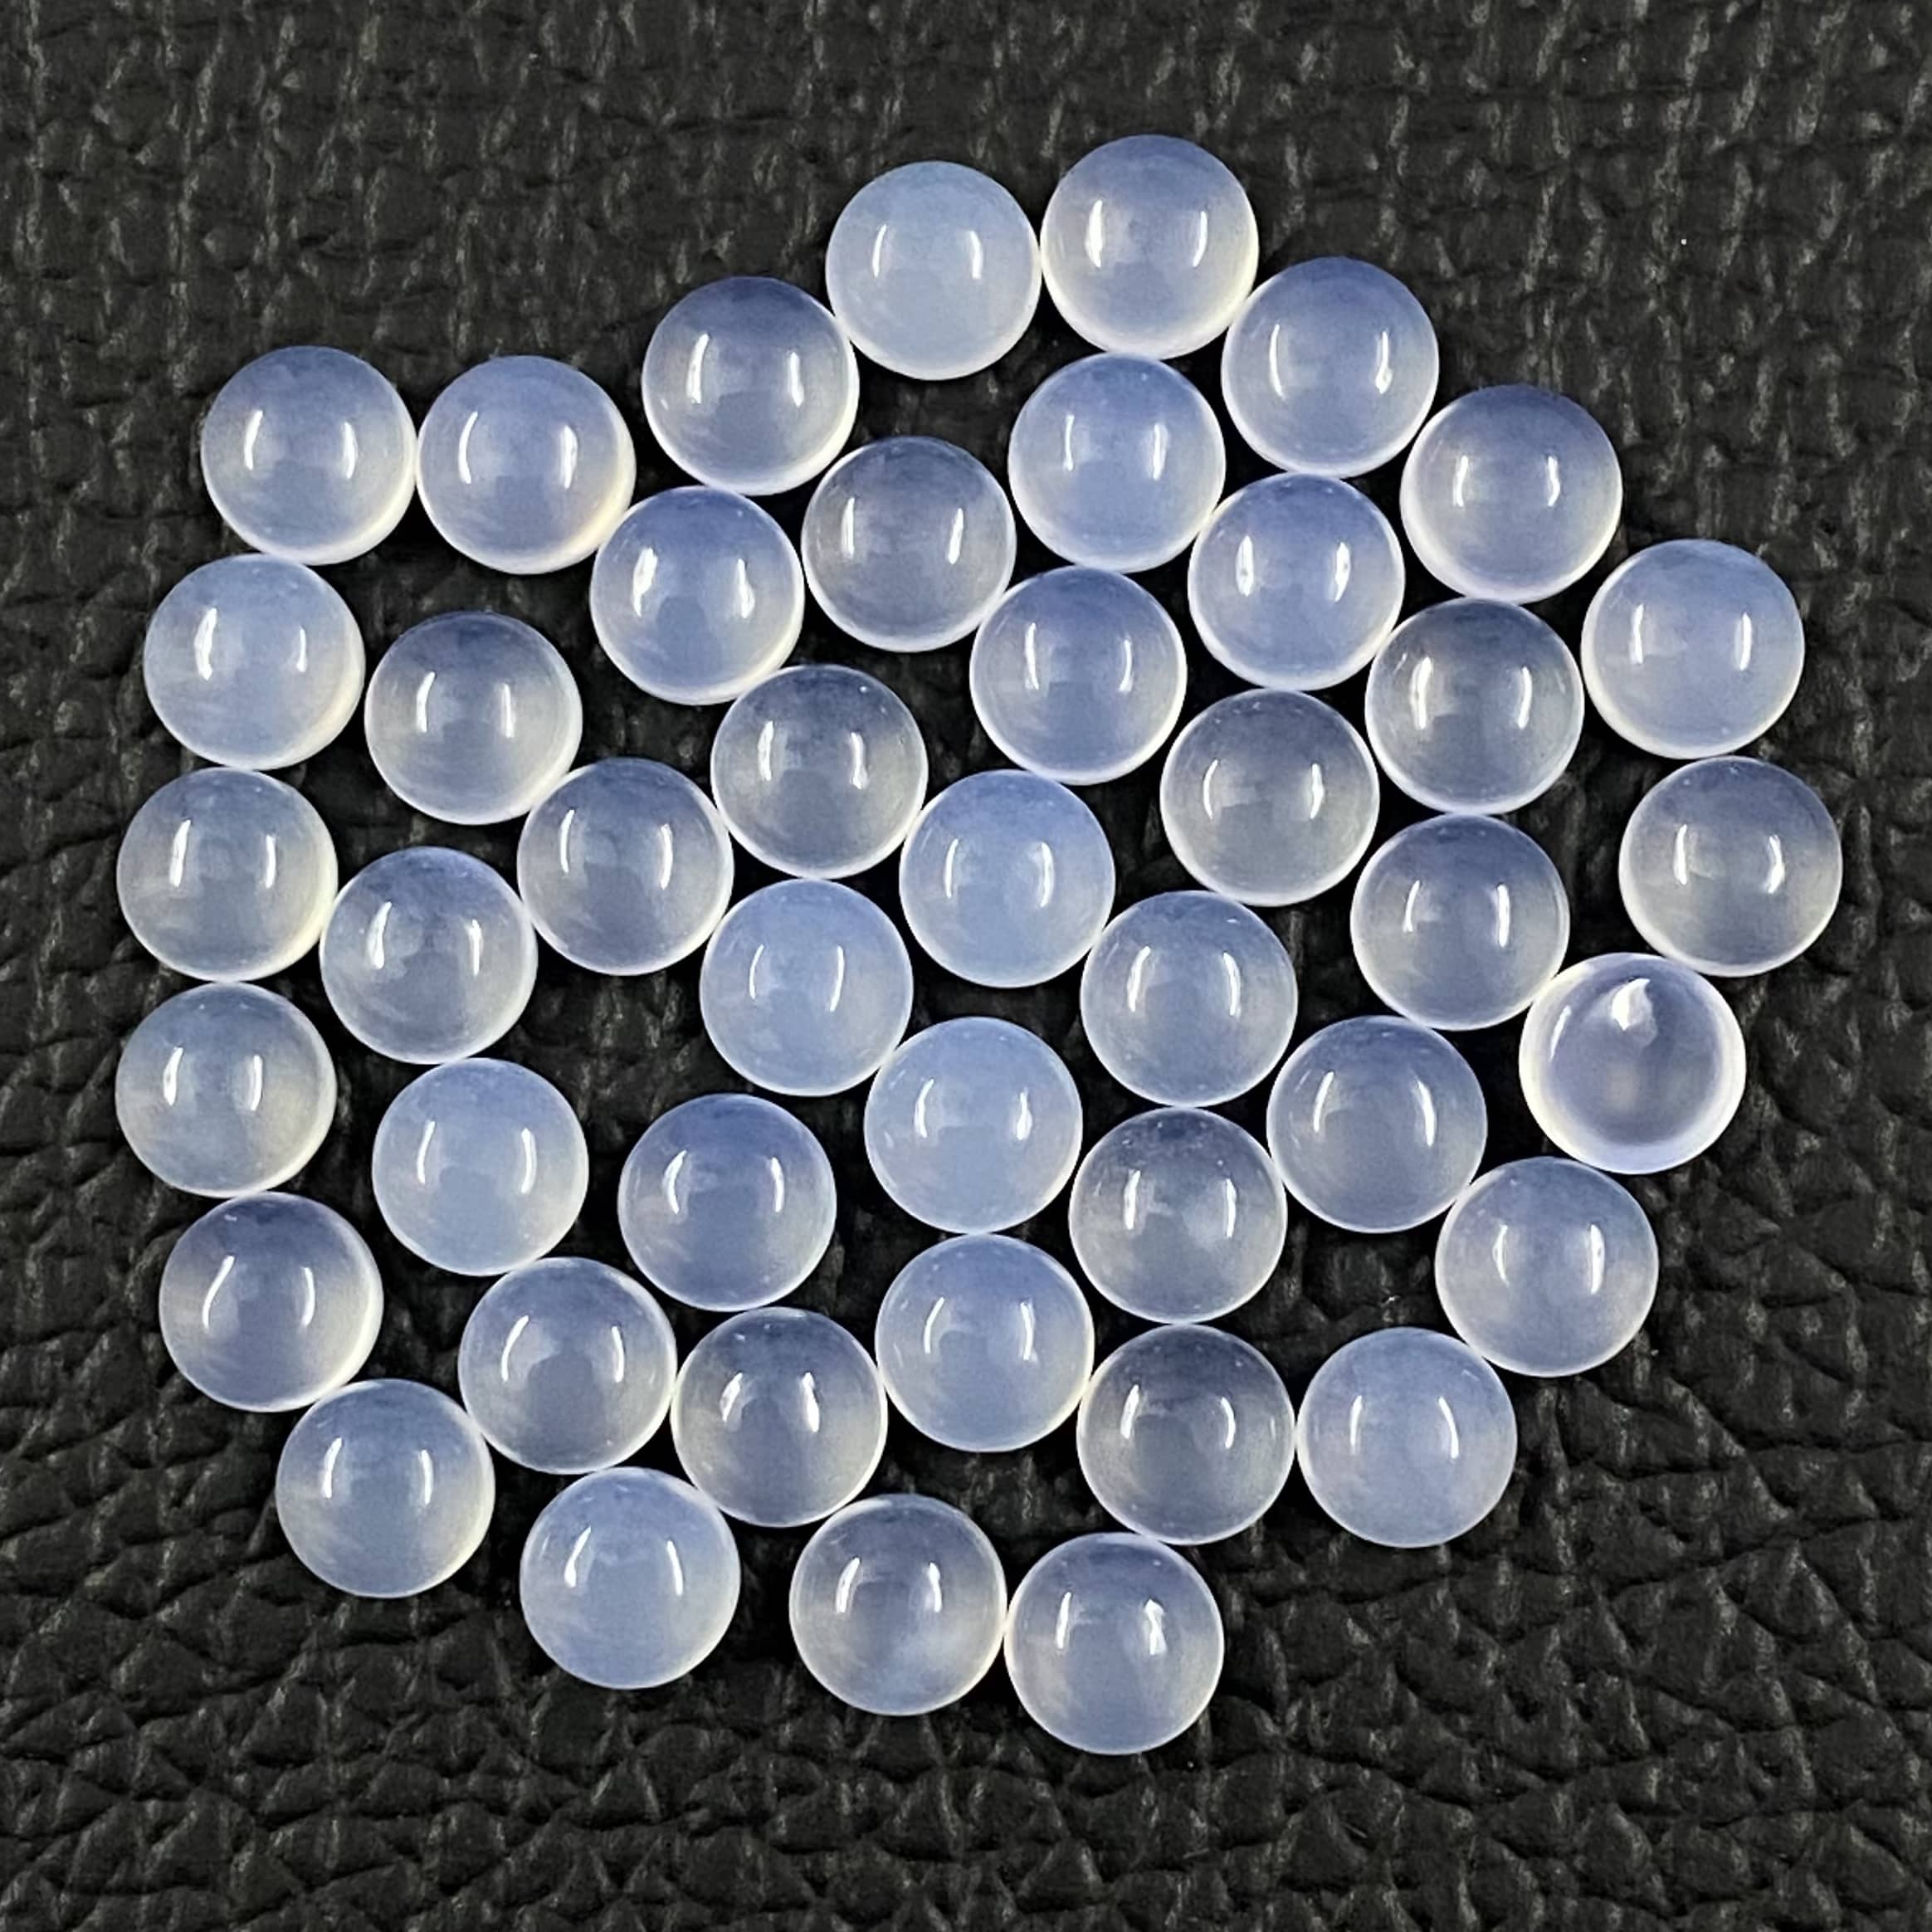 Blue Chalcedony 4mm & 6mm Round Cabochon Loose Gemstones 